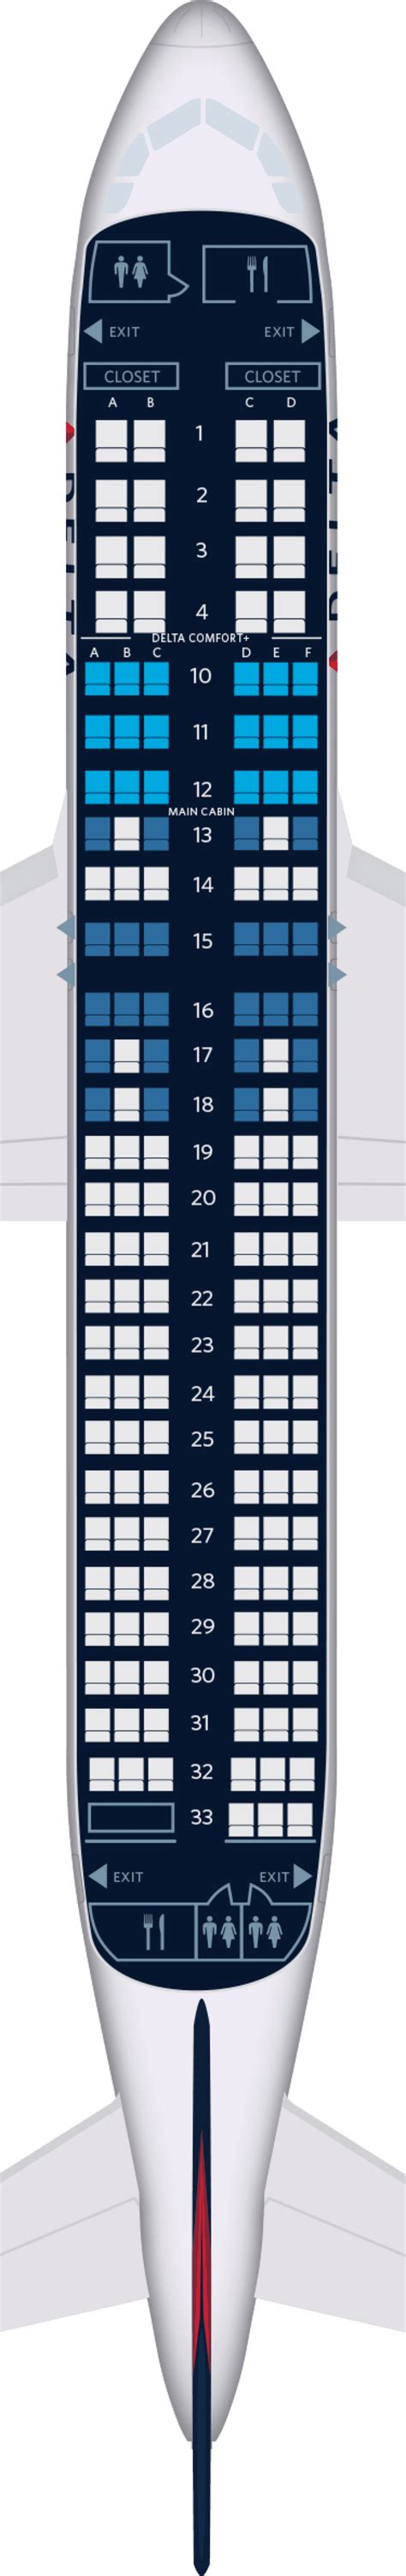 Current Delta (DL) seat map listing. Delta was 